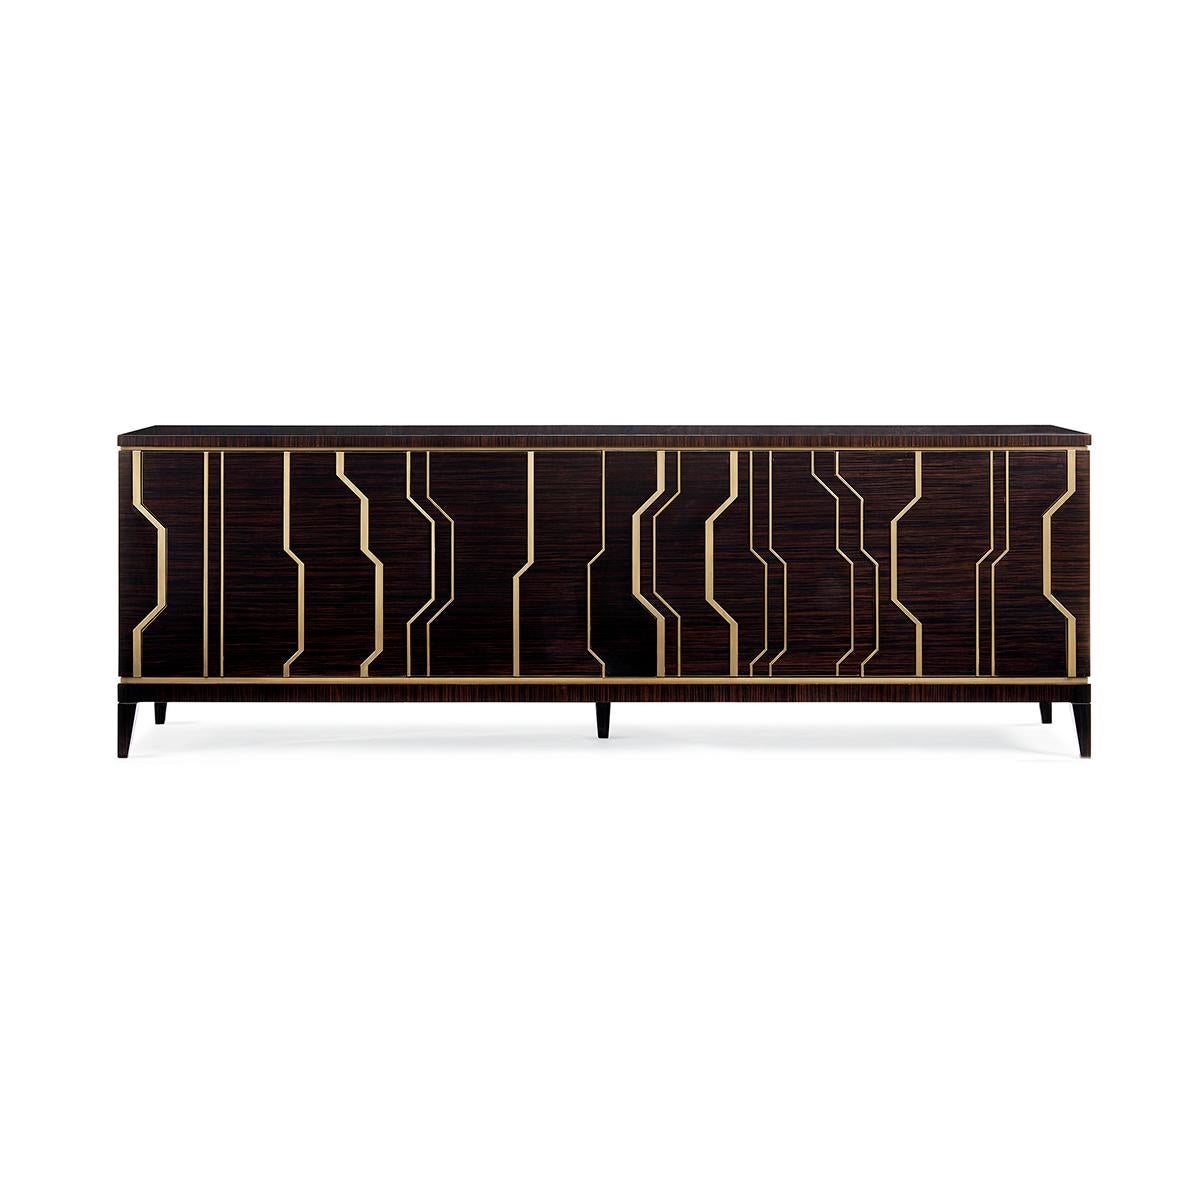 Art Deco Inspired Long Credenza, designed like a sculpture with a connoisseur’s selection of materials—a fashionable Ebony Macassar and French Brass—are precision-cut and masterfully arranged in an imaginative arrangement across its four integrated